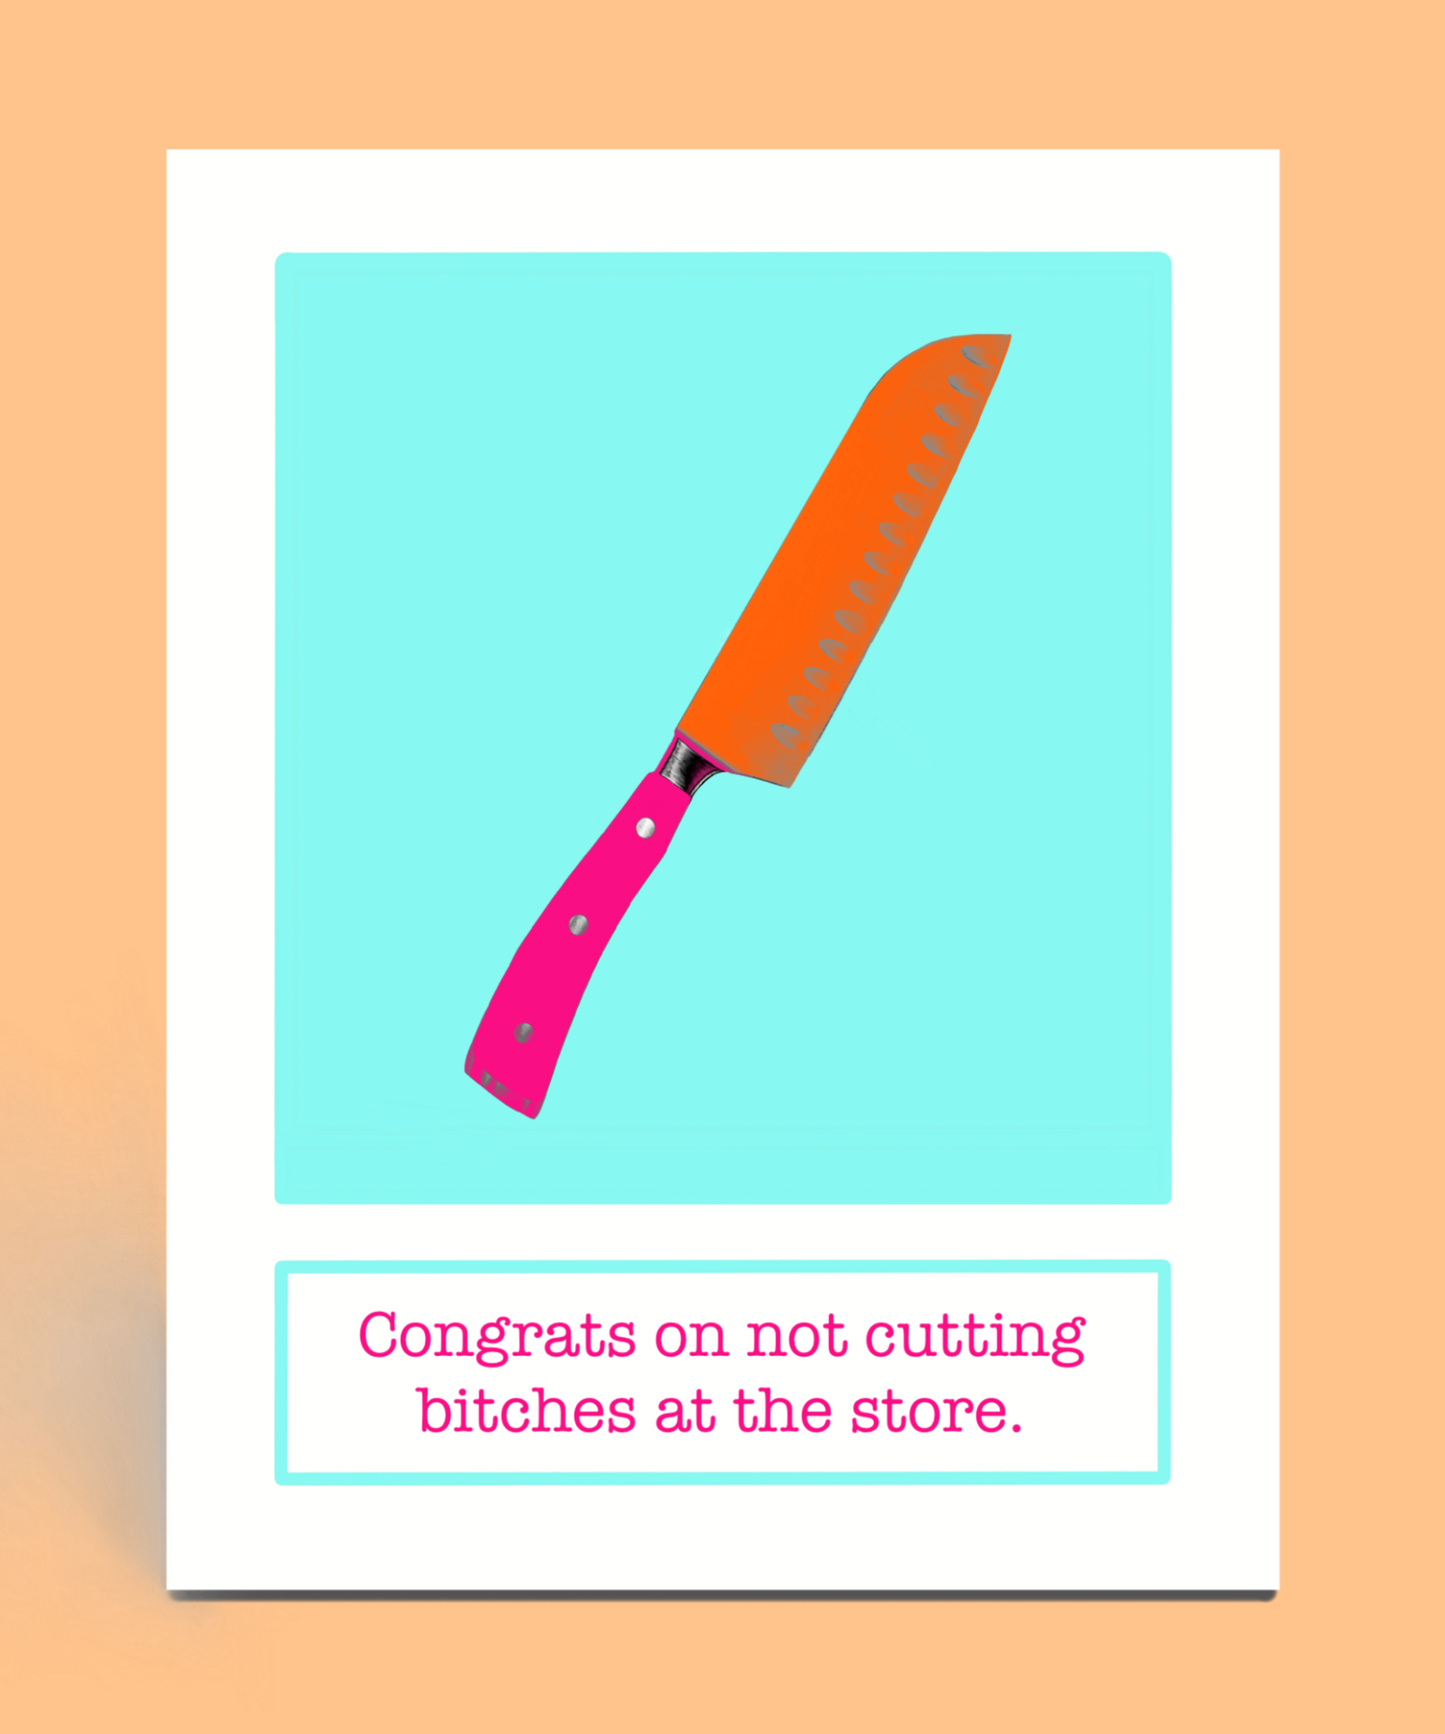 (Not) Cutting Bitches